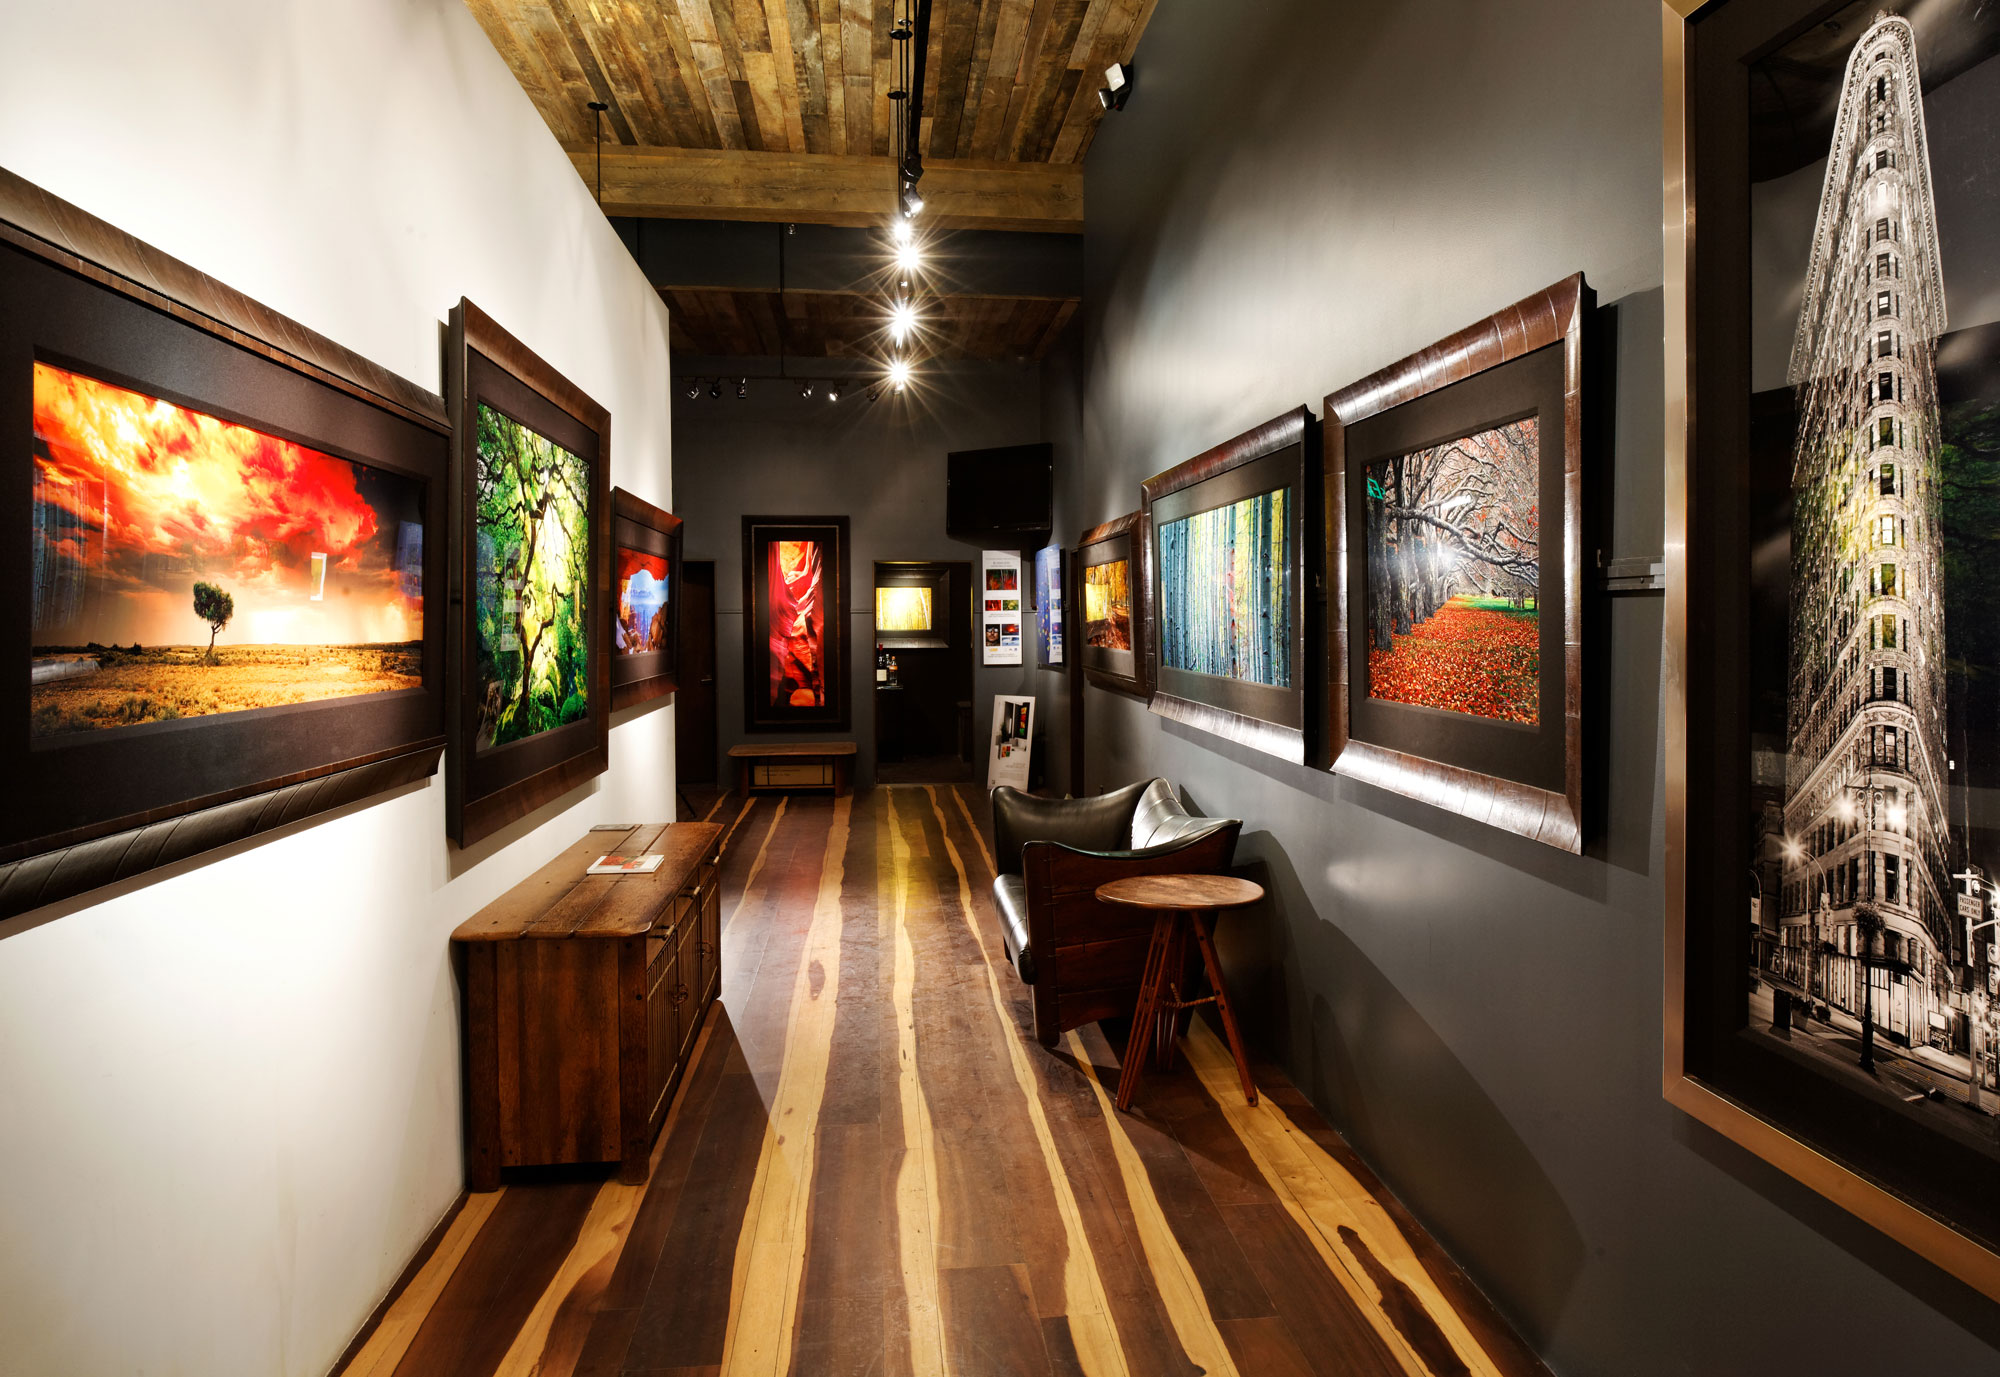 PETER LIK GALLERY Charles Cunniffe Architects